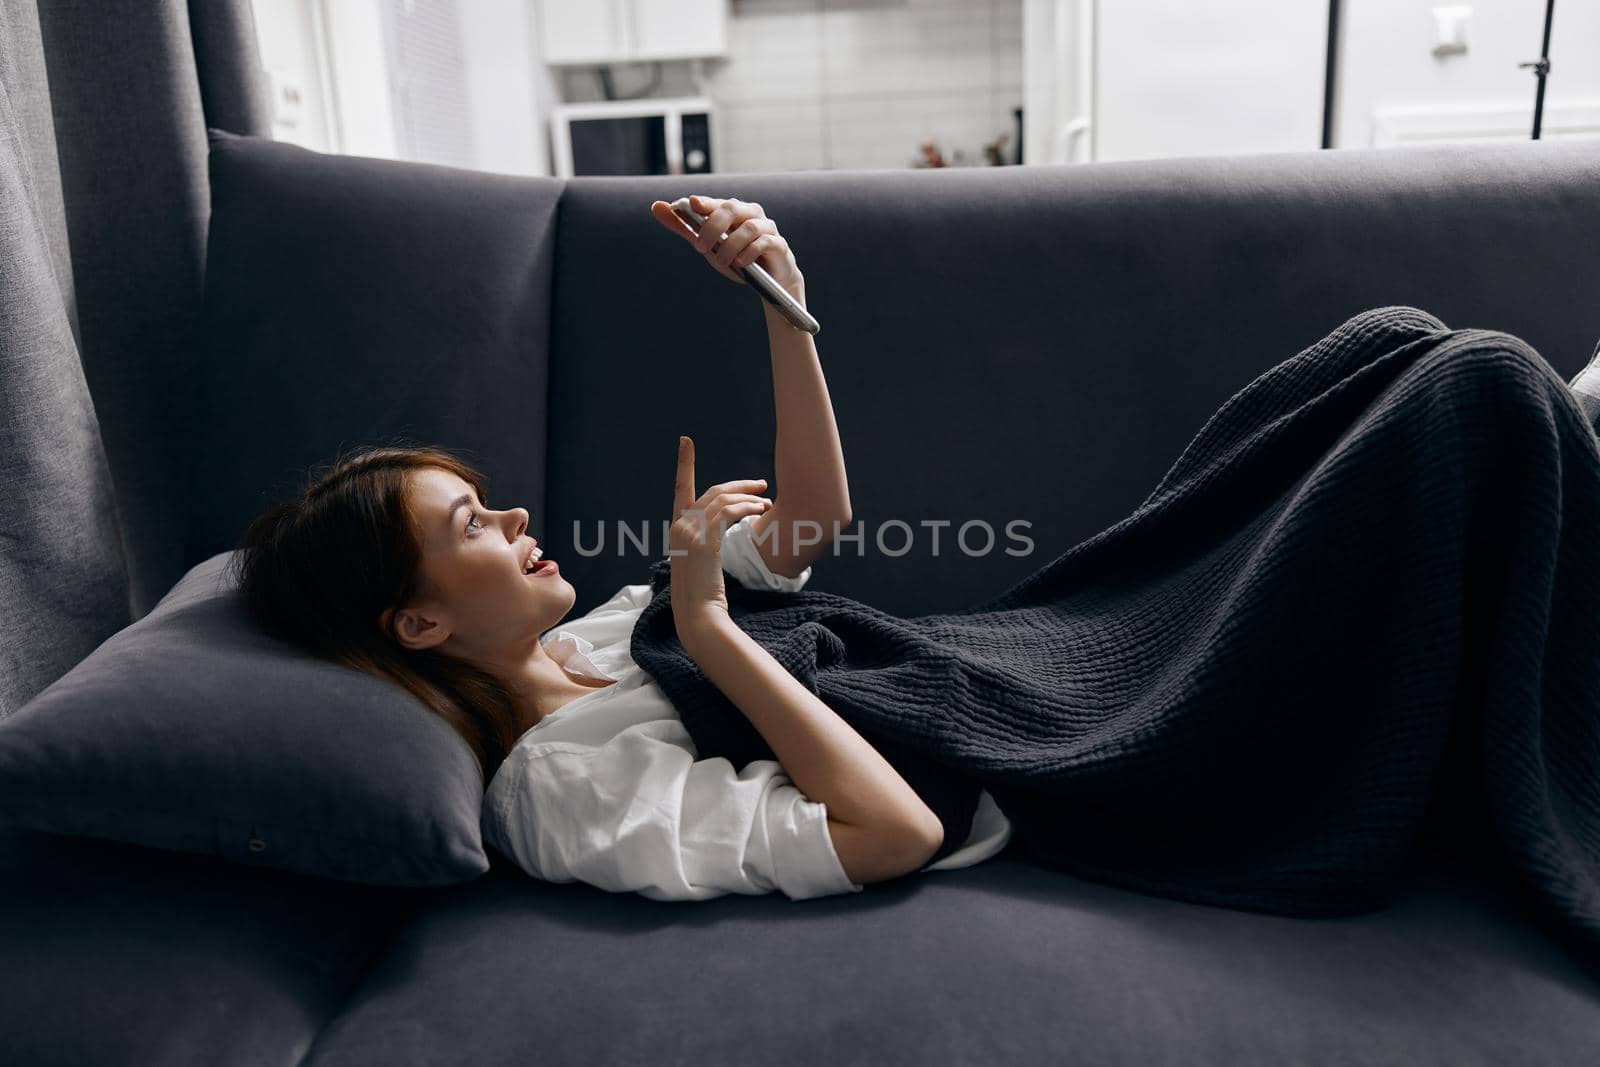 woman looking at the phone screen hiding with a blanket on the sofa by SHOTPRIME